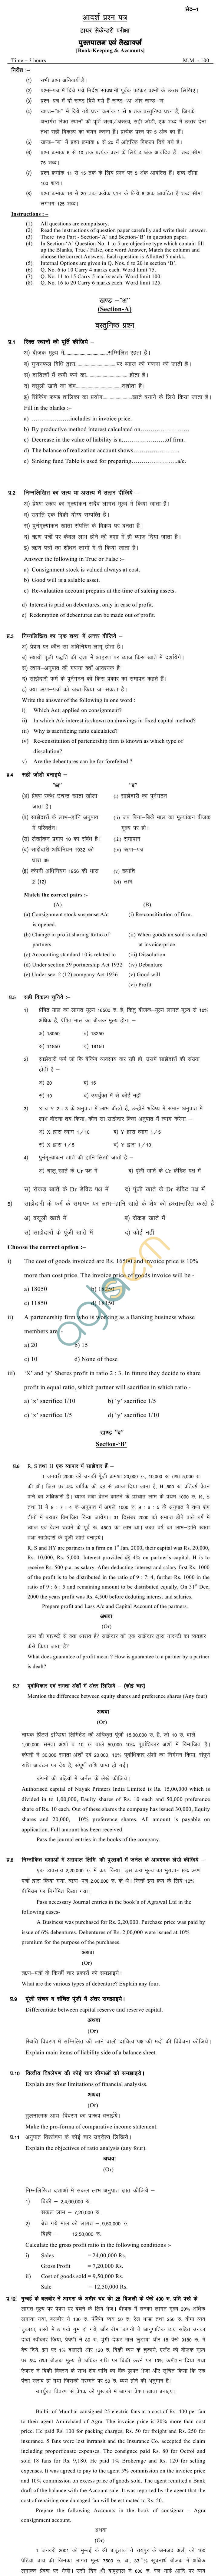 MP Board Class XII Book Keep and Accountancy Model Questions & Answers - Set 1